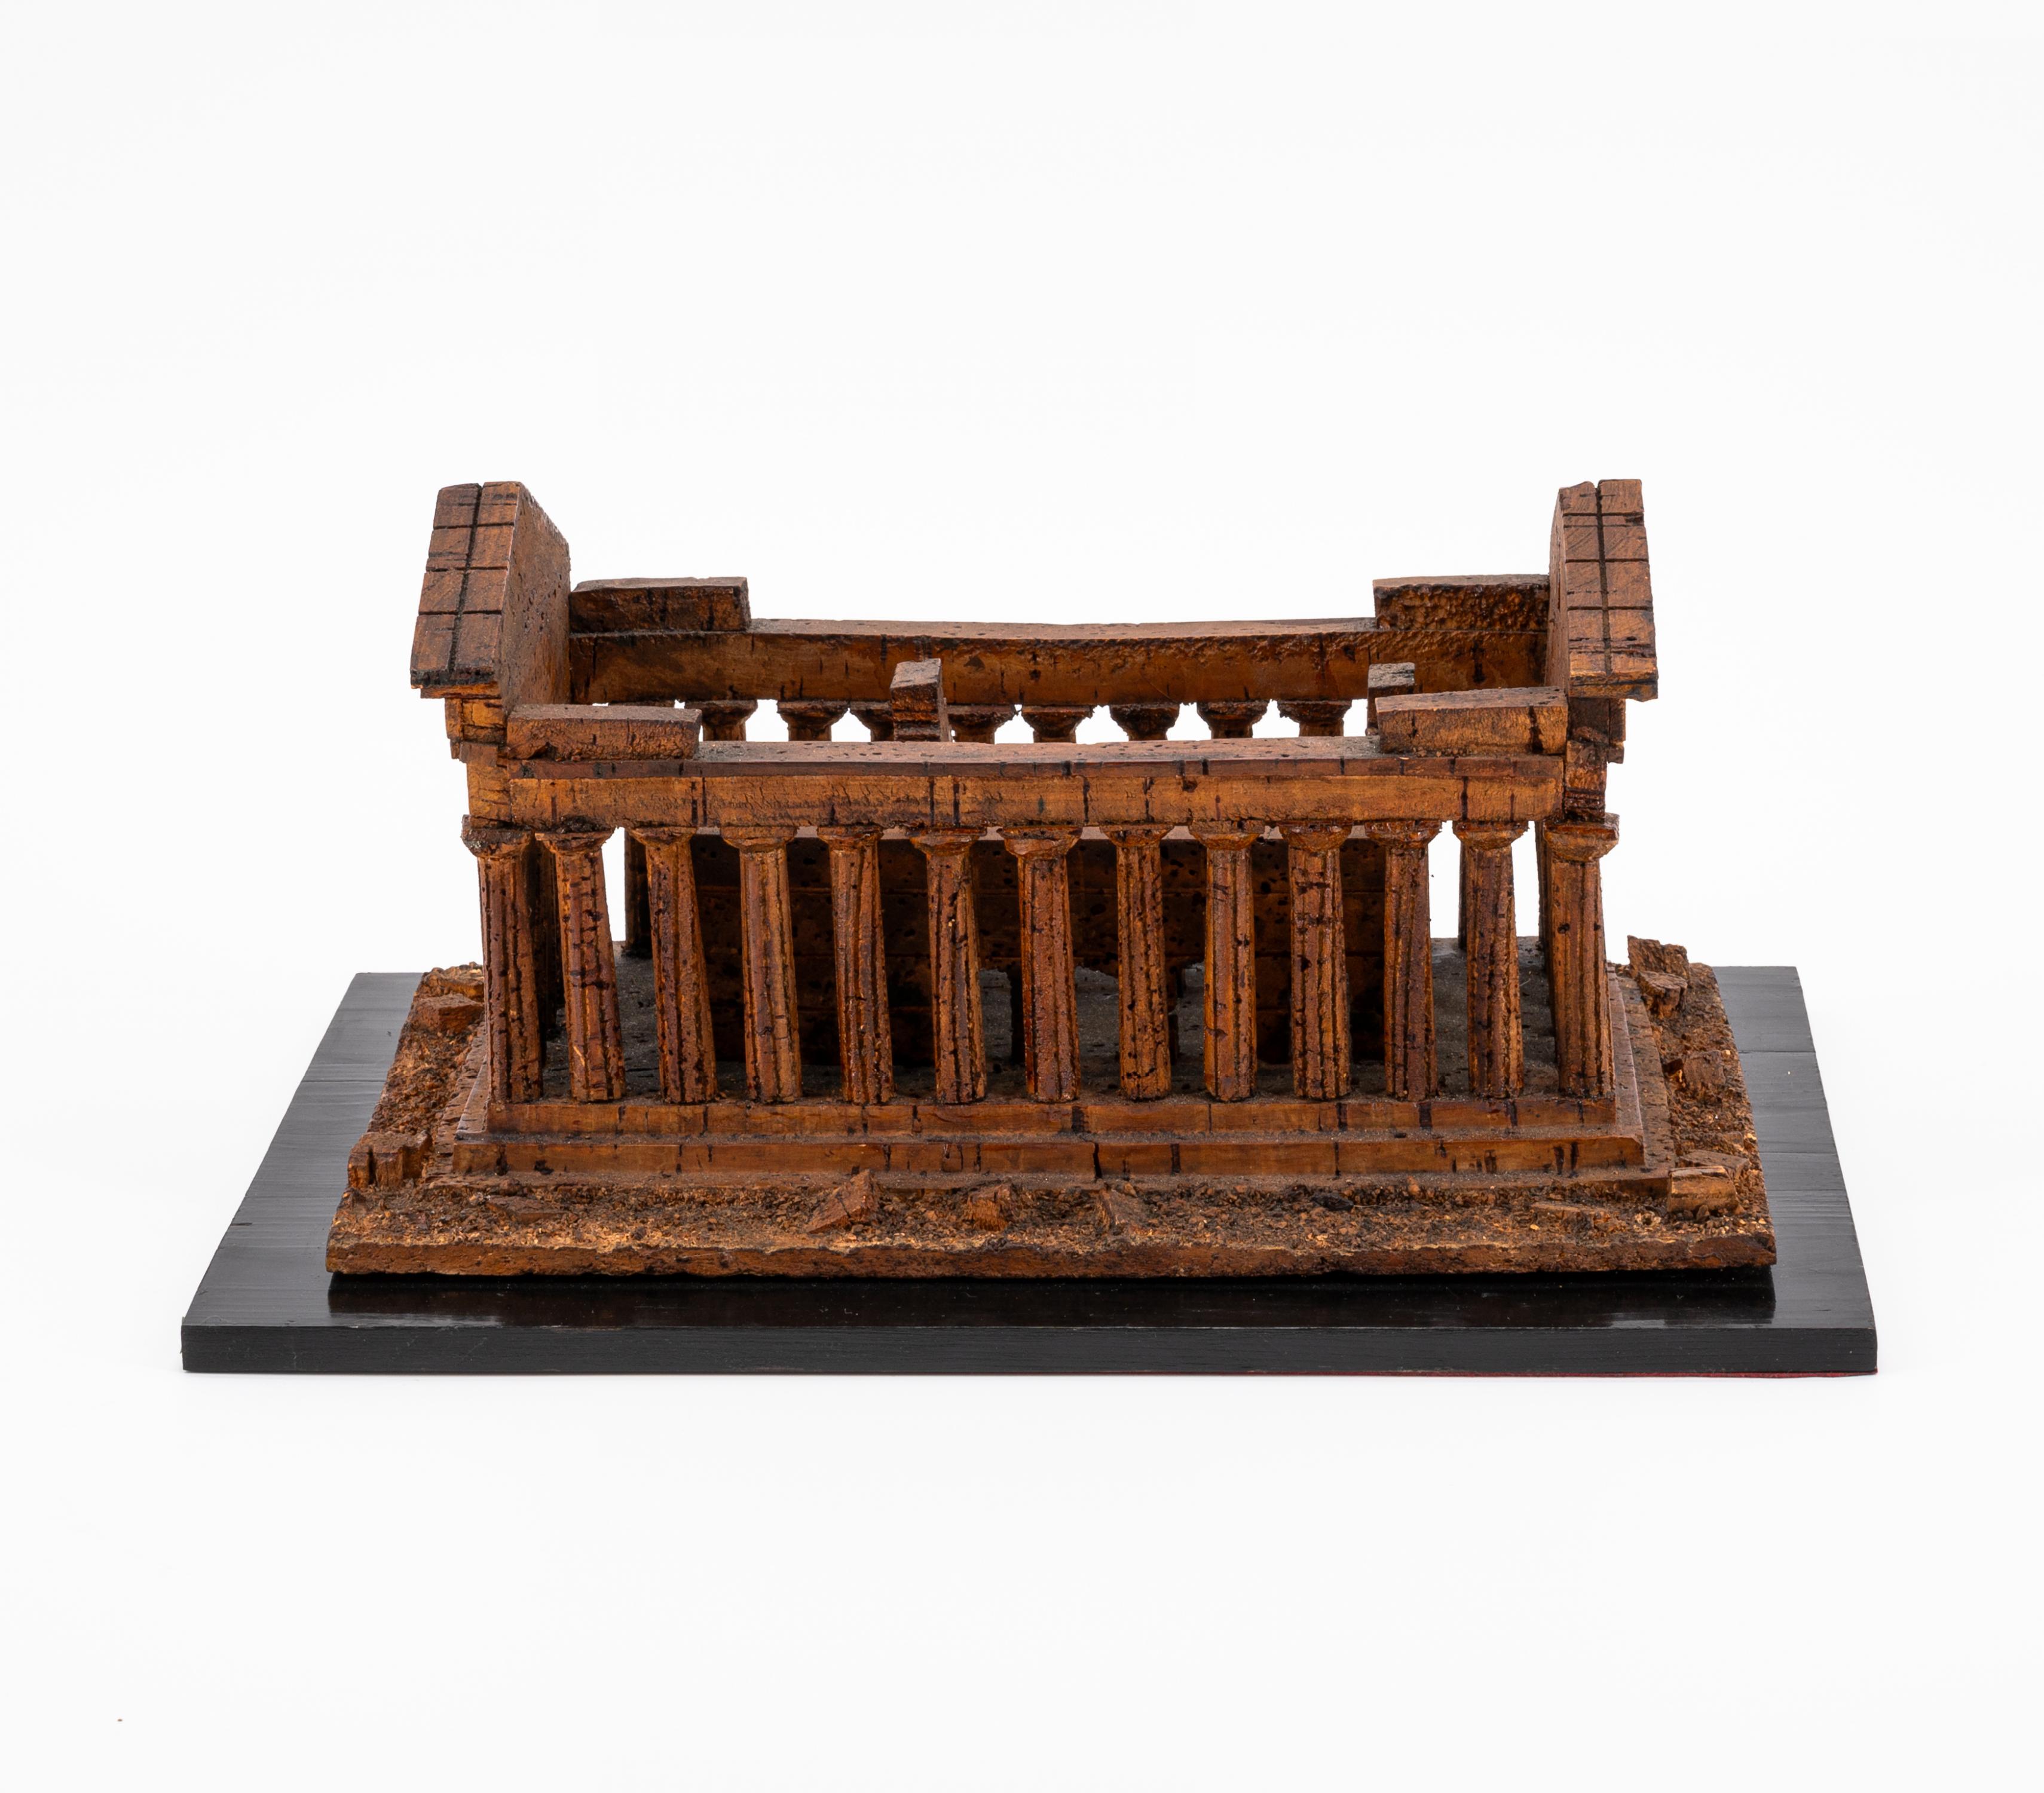 'GRAND TOUR' CORK MODEL OF AN ANCIENT TEMPLE IN PAESTUM - Image 3 of 6